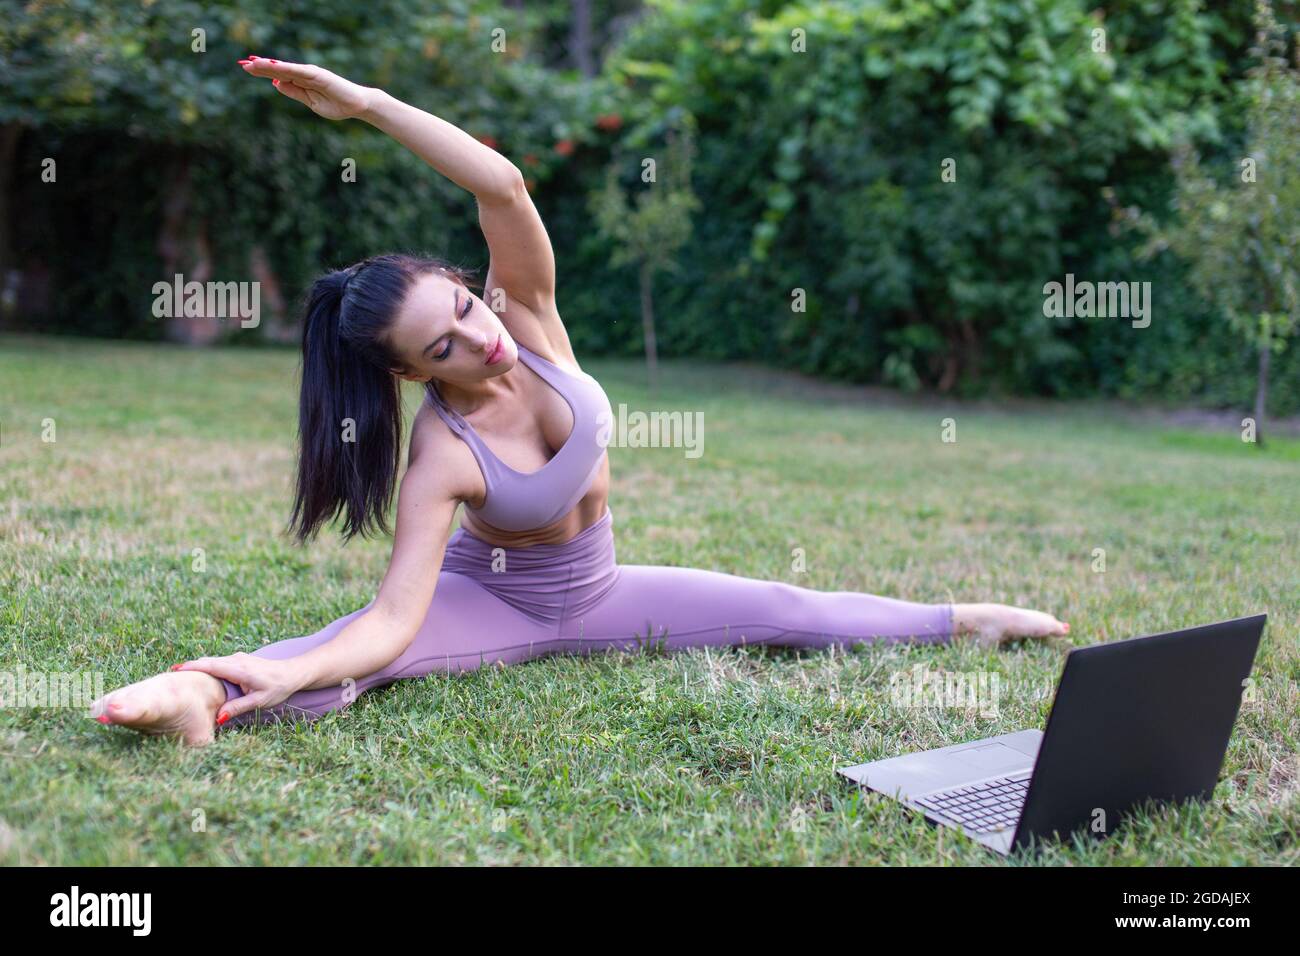 Young woman in sportswear learning from tutorial video stretching in garden, outdoors Stock Photo